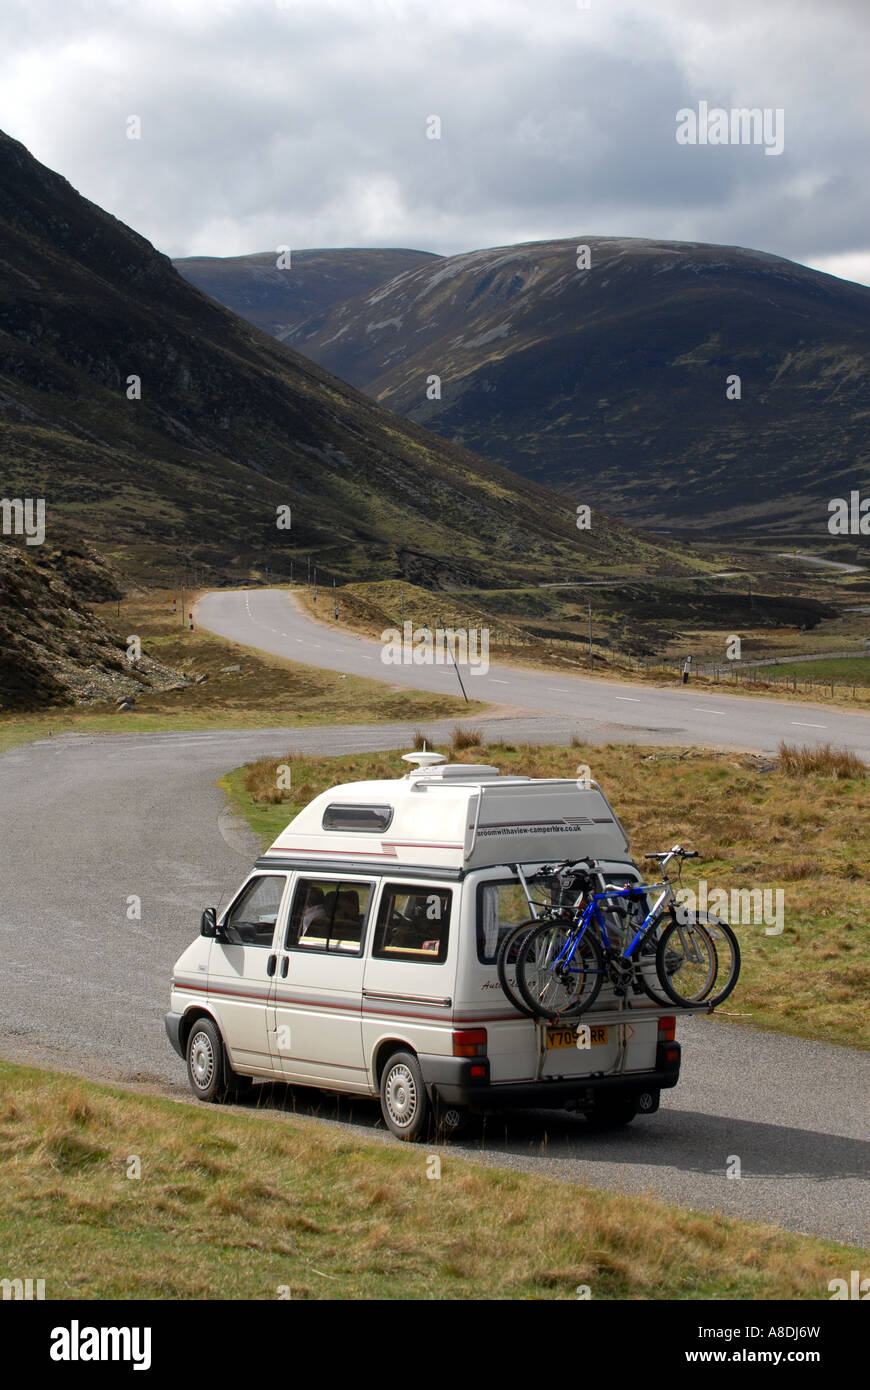 A VOLKSWAGEN TRIDENT CAMPER VAN ON A TOURING HOLIDAY IN THE SCOTTISH HIGHLANDS UK Stock Photo